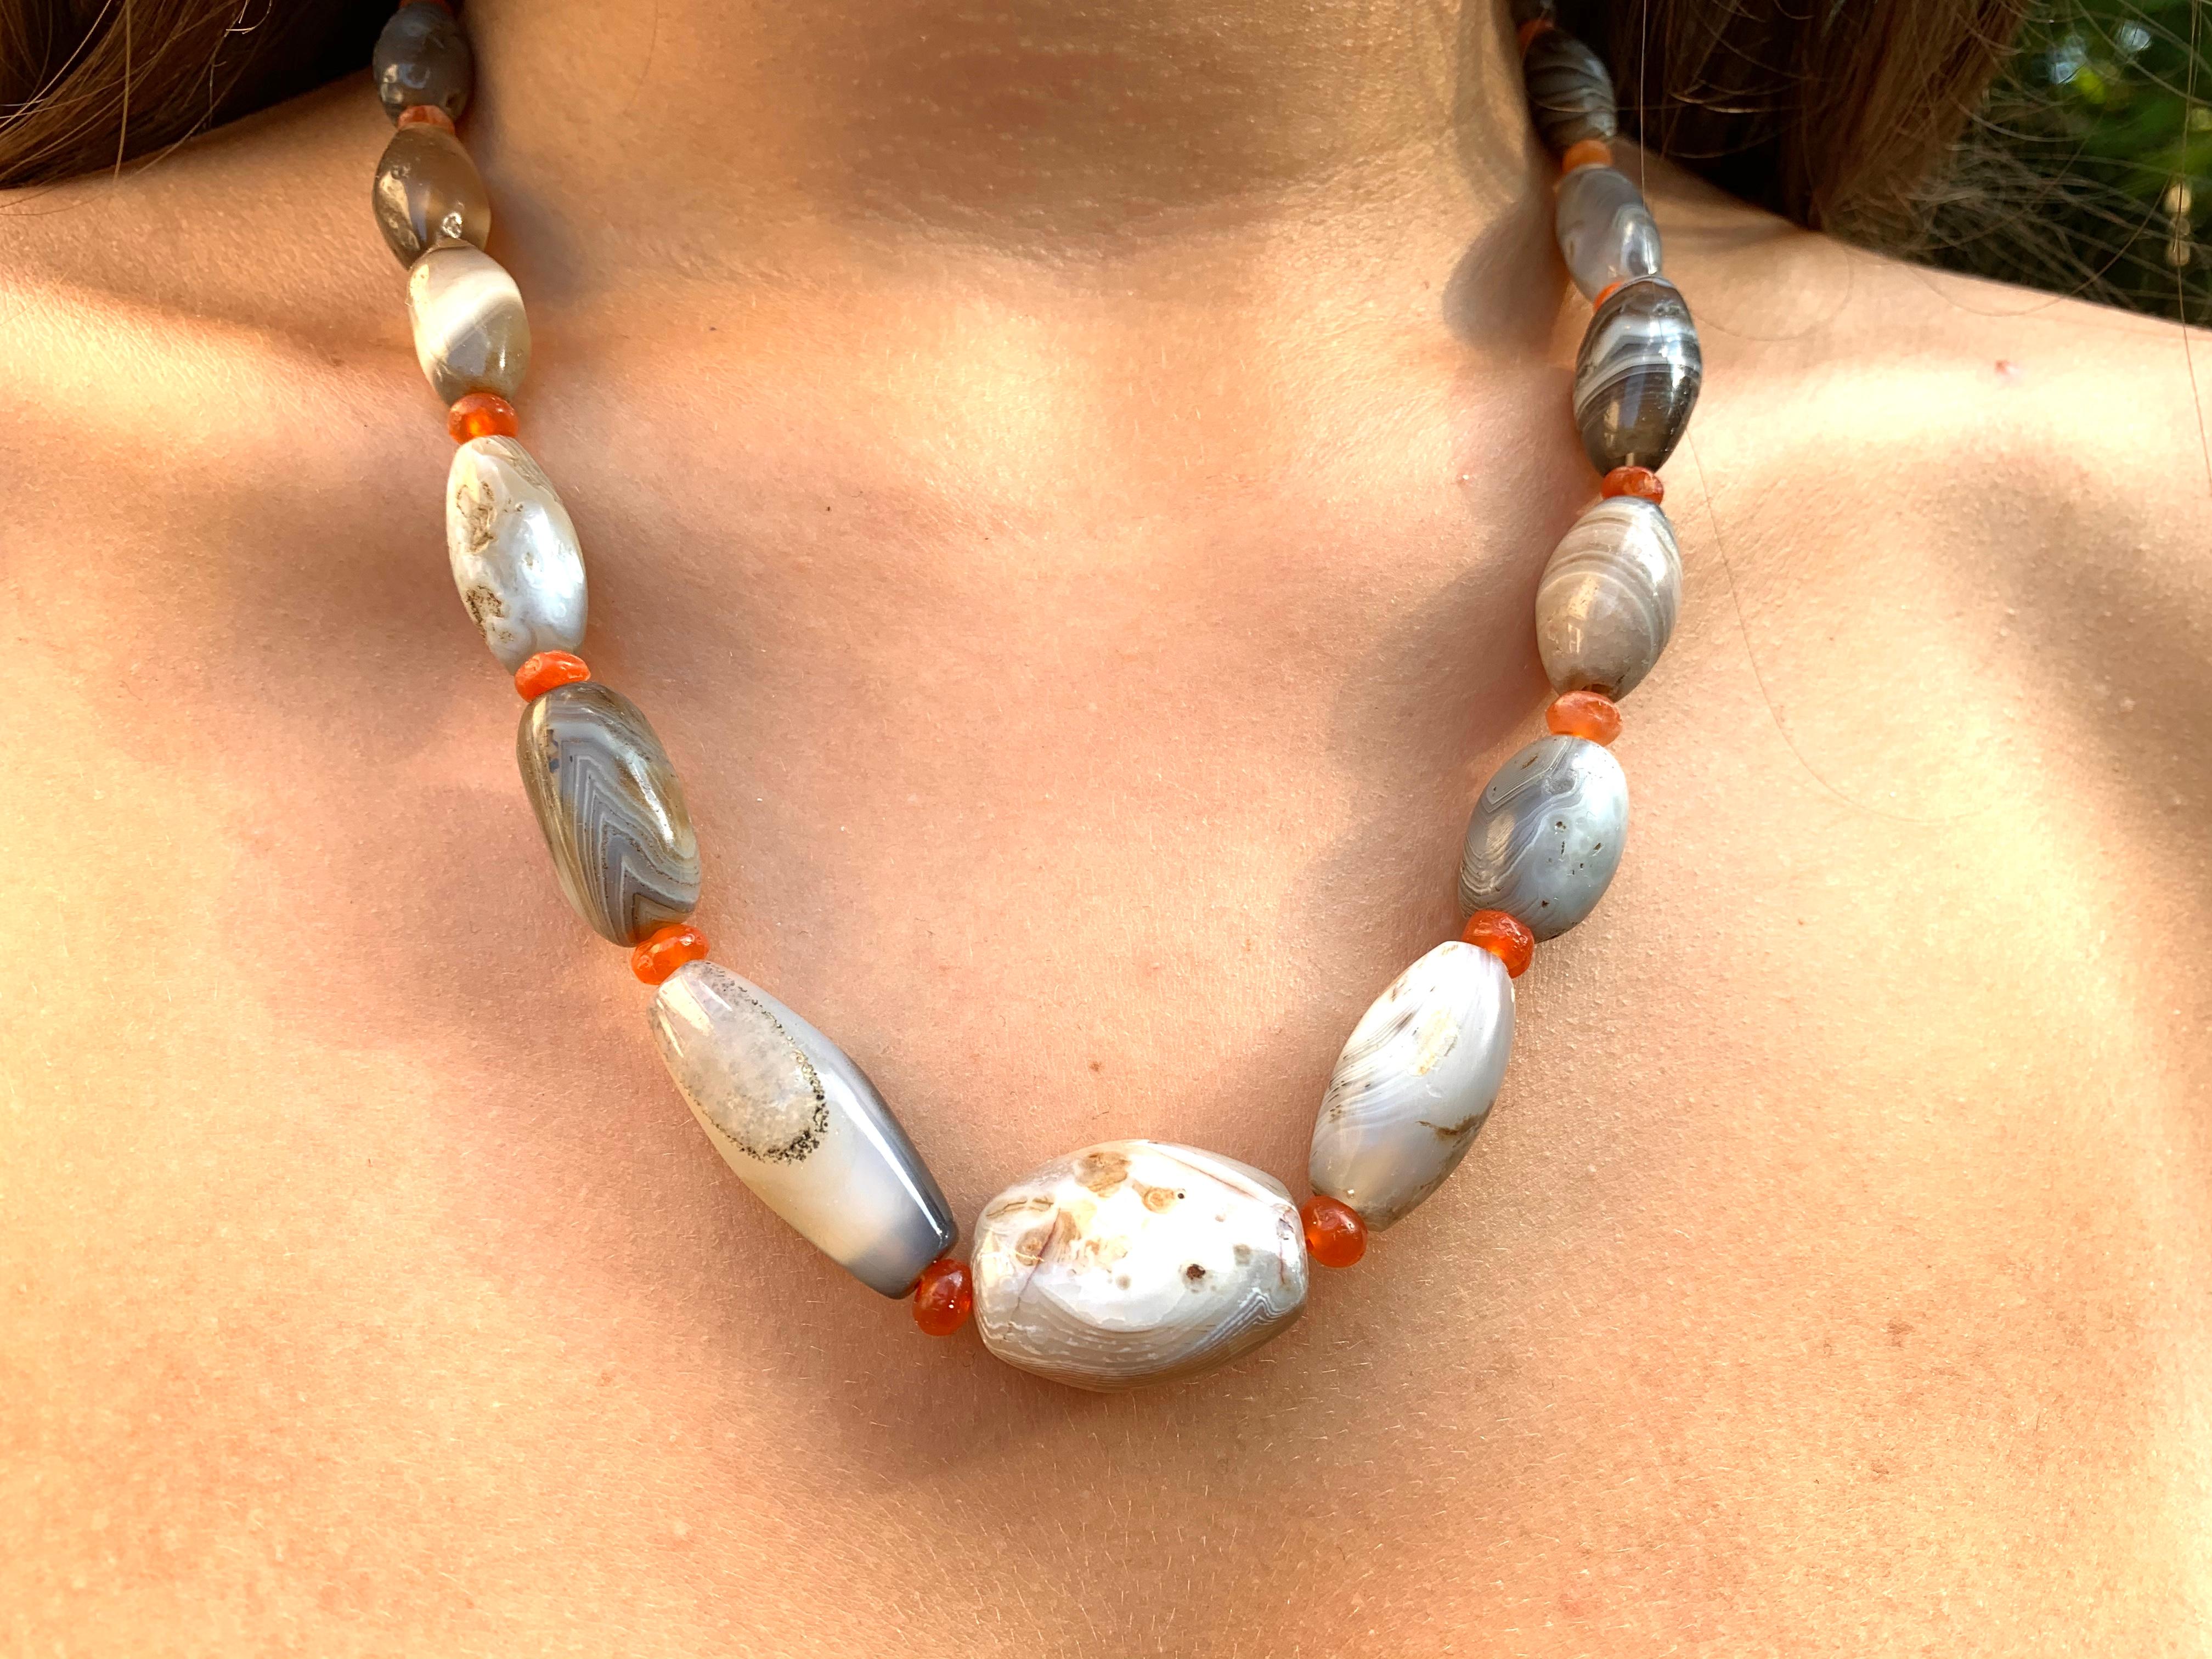 Ancient amulet necklace composed of twenty one well matched graduated banded agate biconical beads measuring 32mm to 17mm and 22 carnelian beads approximately 5mm in diameter. The agates of exceptional figure showing 